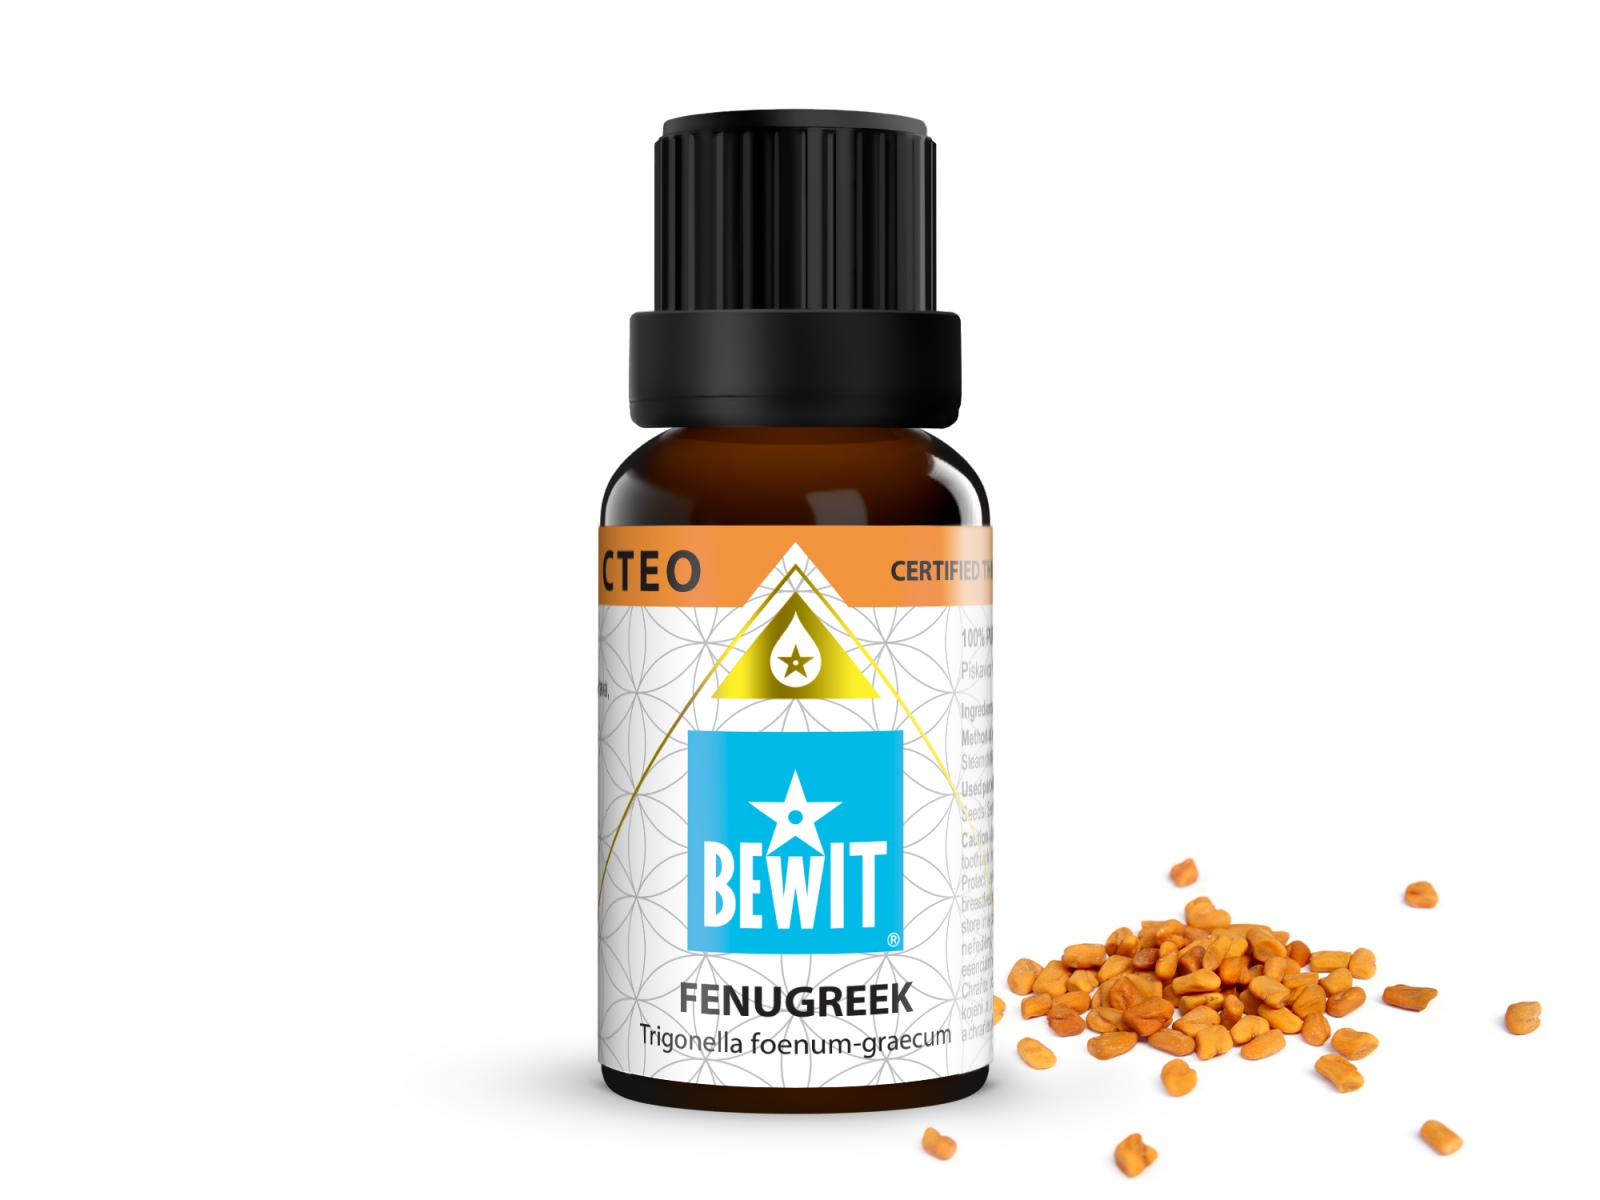 BEWIT Fenugreek - 100% pure and natural CTEO® essential oil - 1